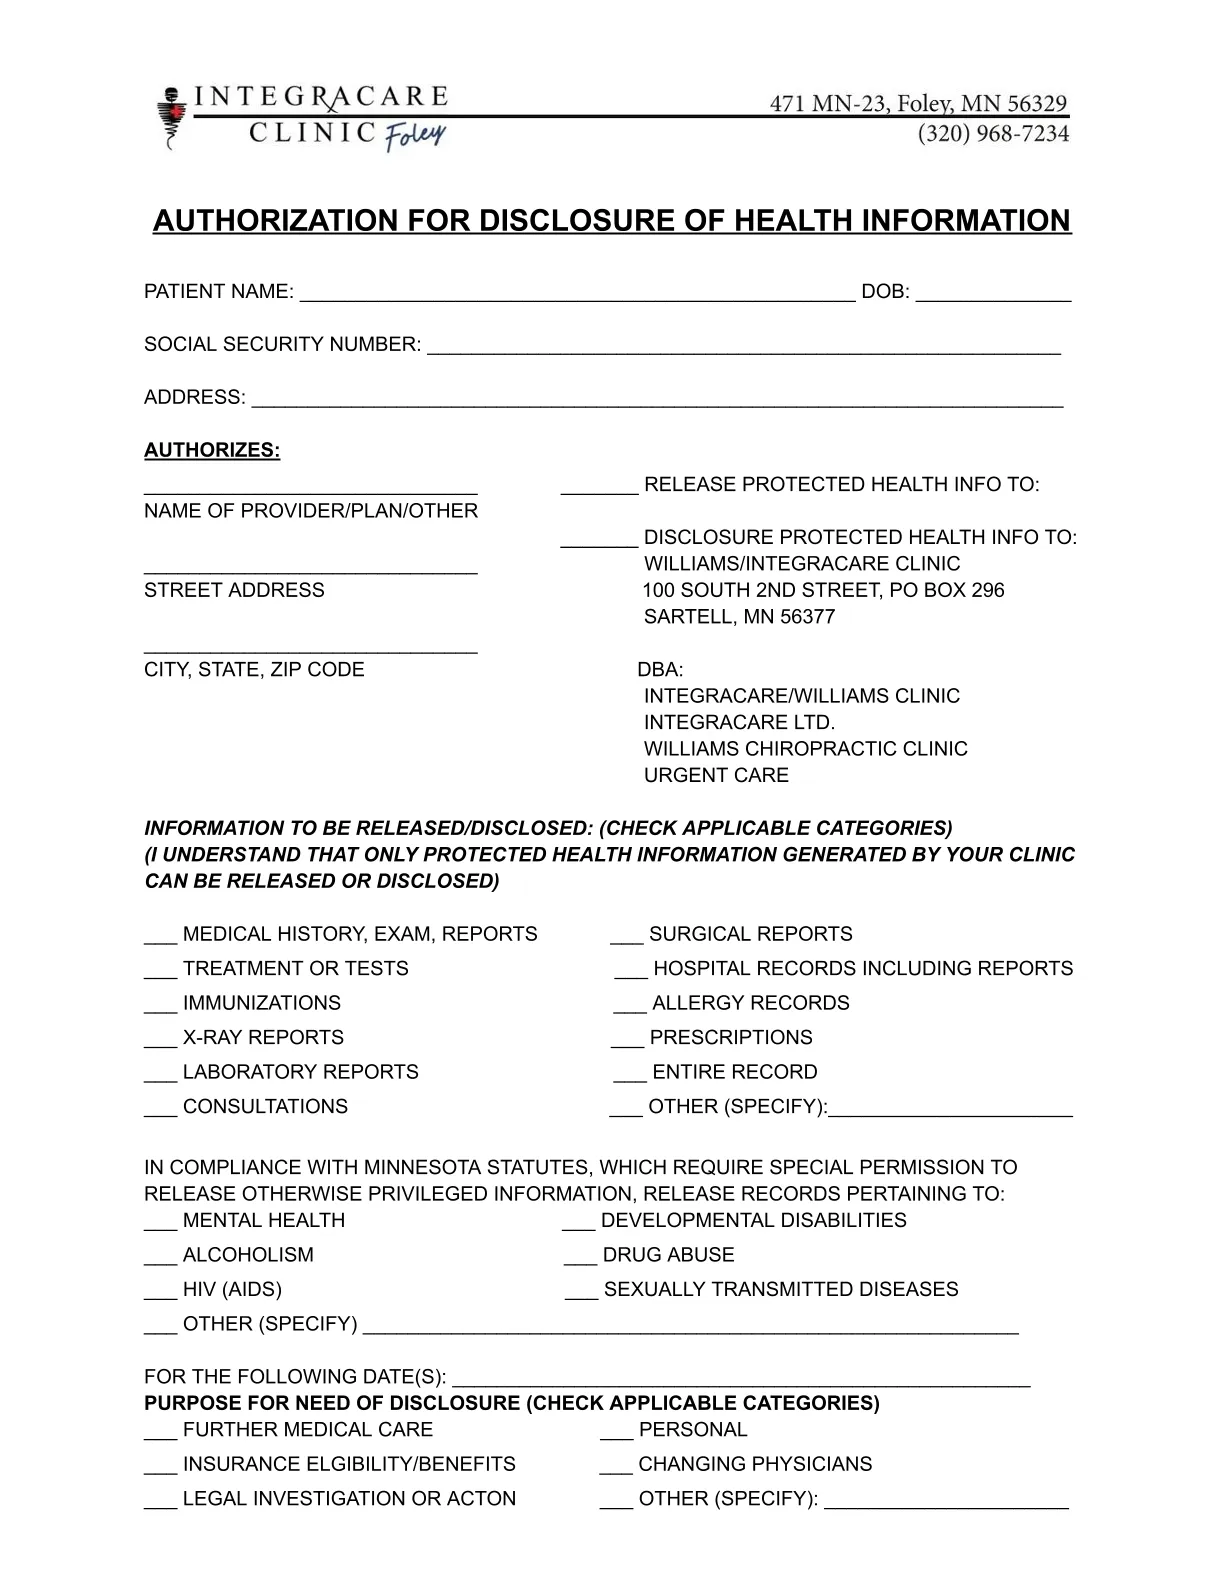 Authorization for Disclosure of Health Information - Sending IN (Foley)